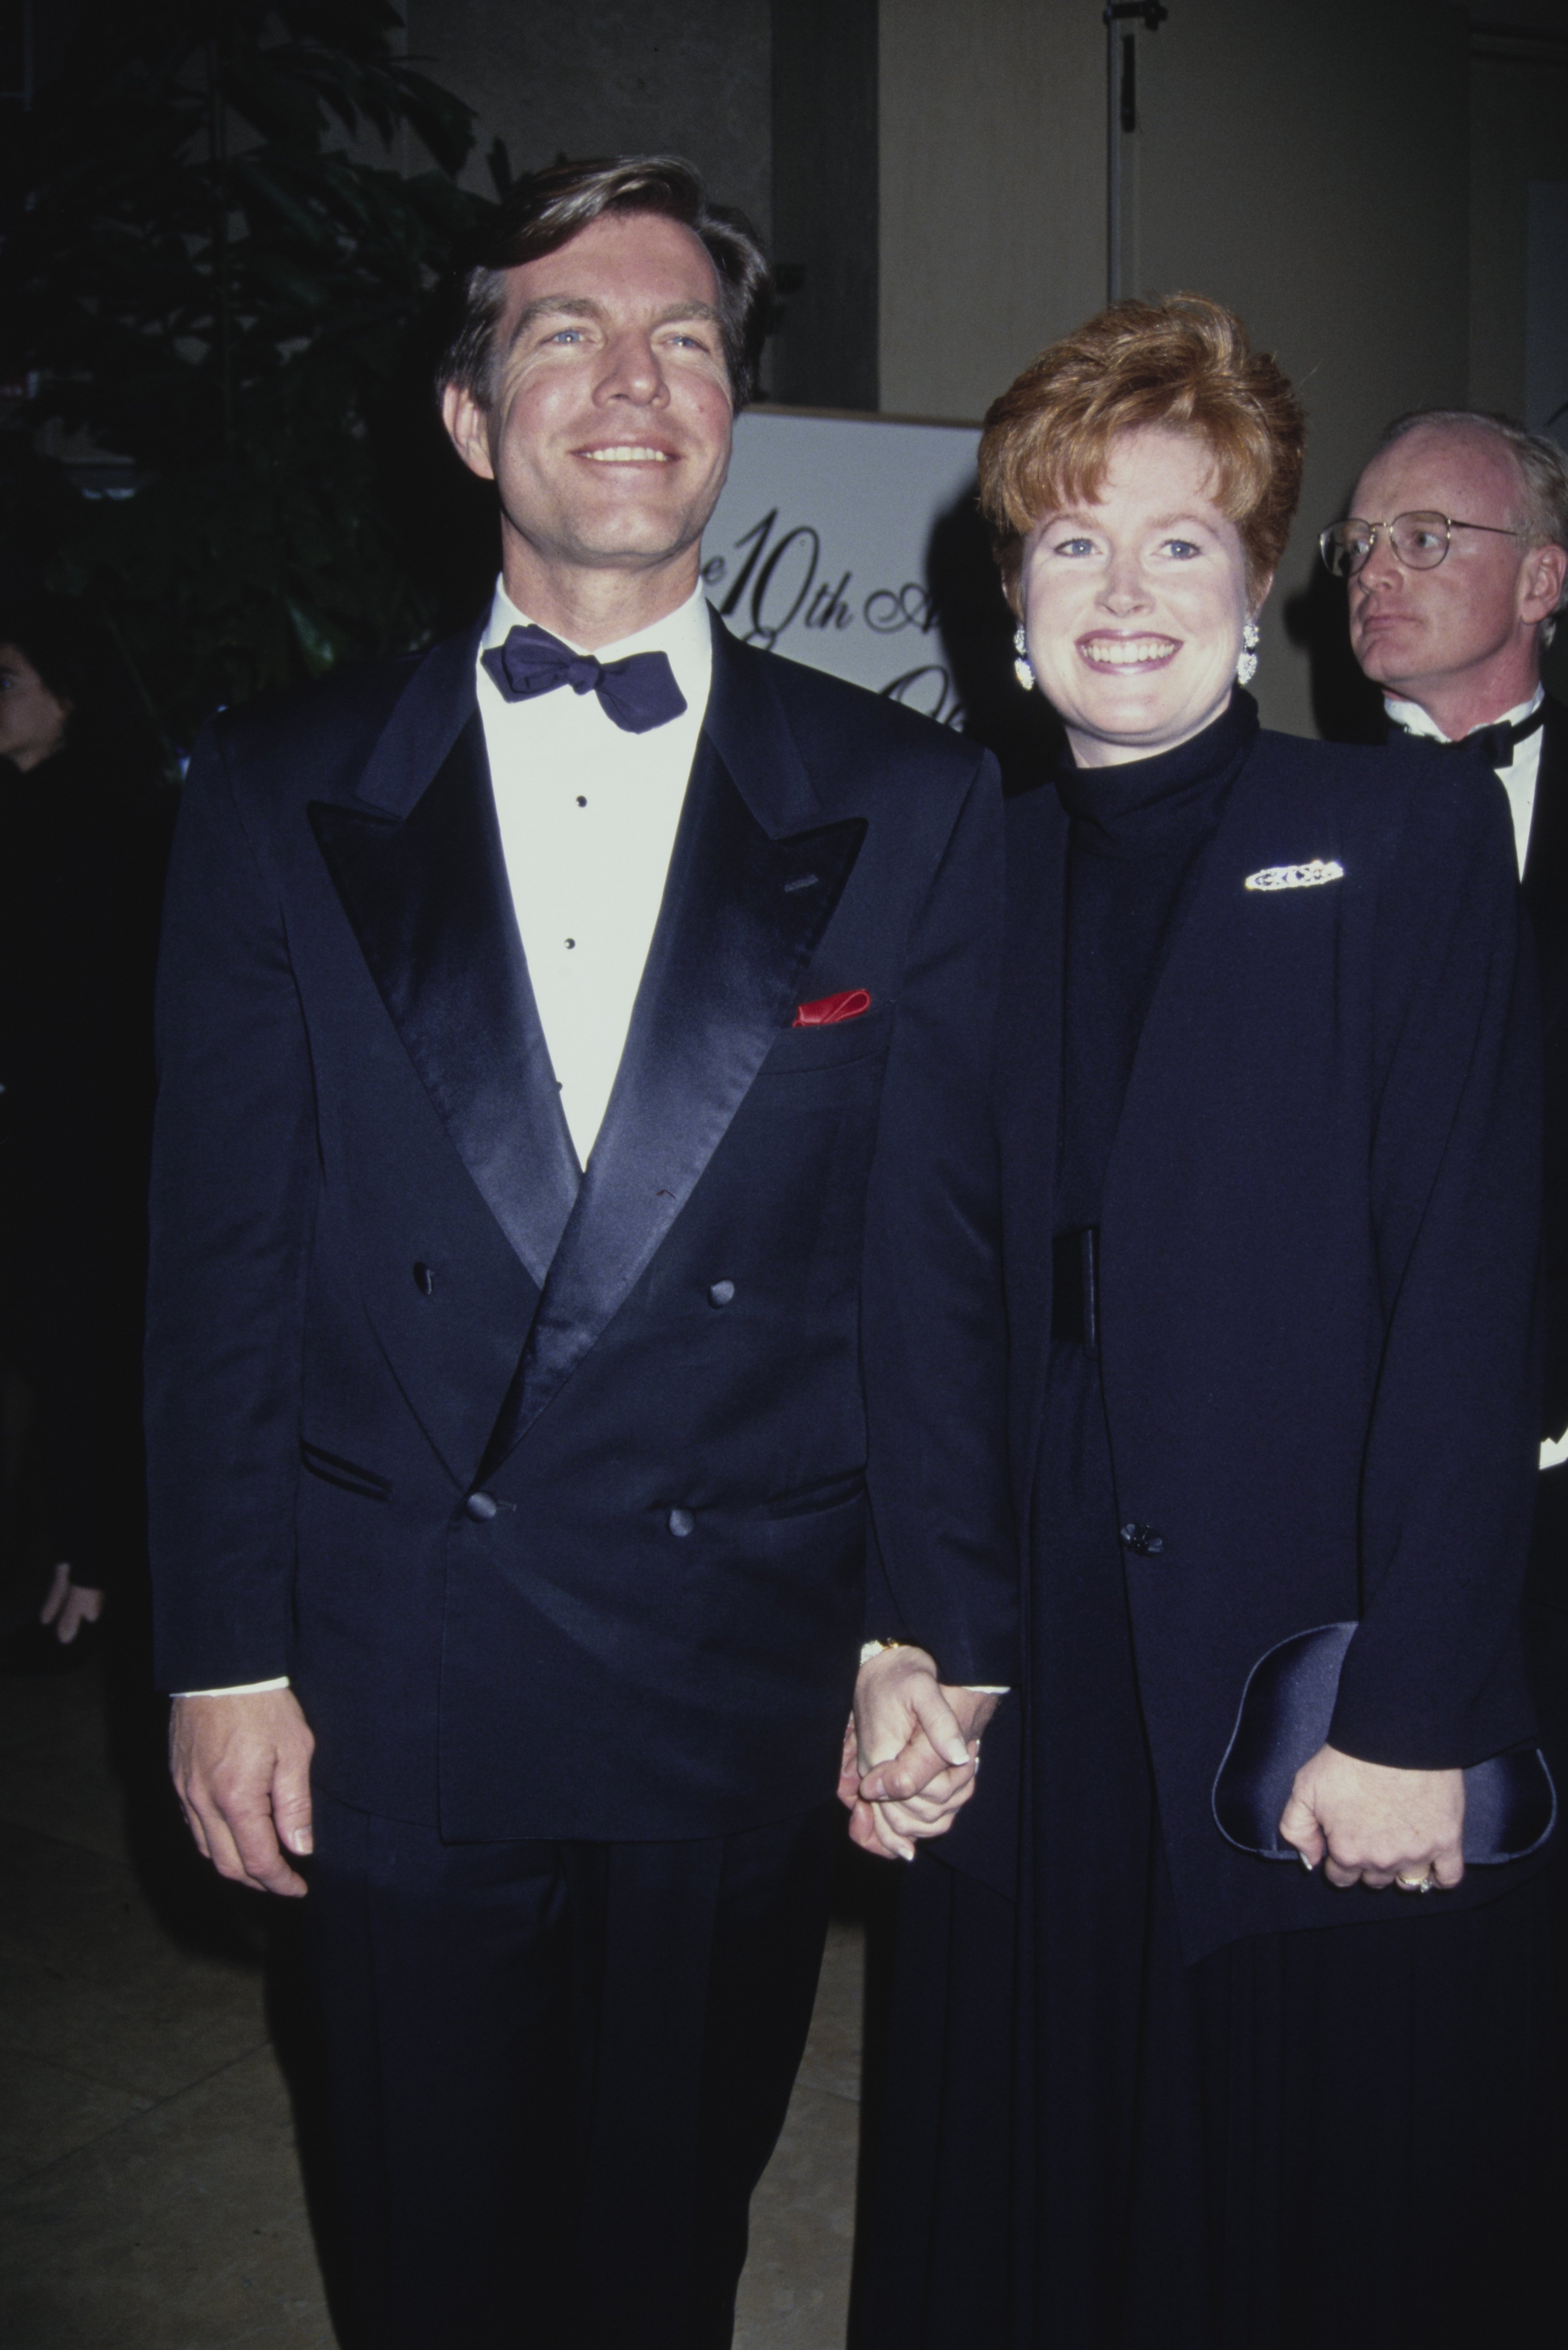 Peter Bergman and his wife, Mariellen Bergman, attend the 10th Annual Soap Opera Digest Awards, held at the Beverly Hilton Hotel in Beverly Hills, California, 4th February 1994 | Source: Getty Images